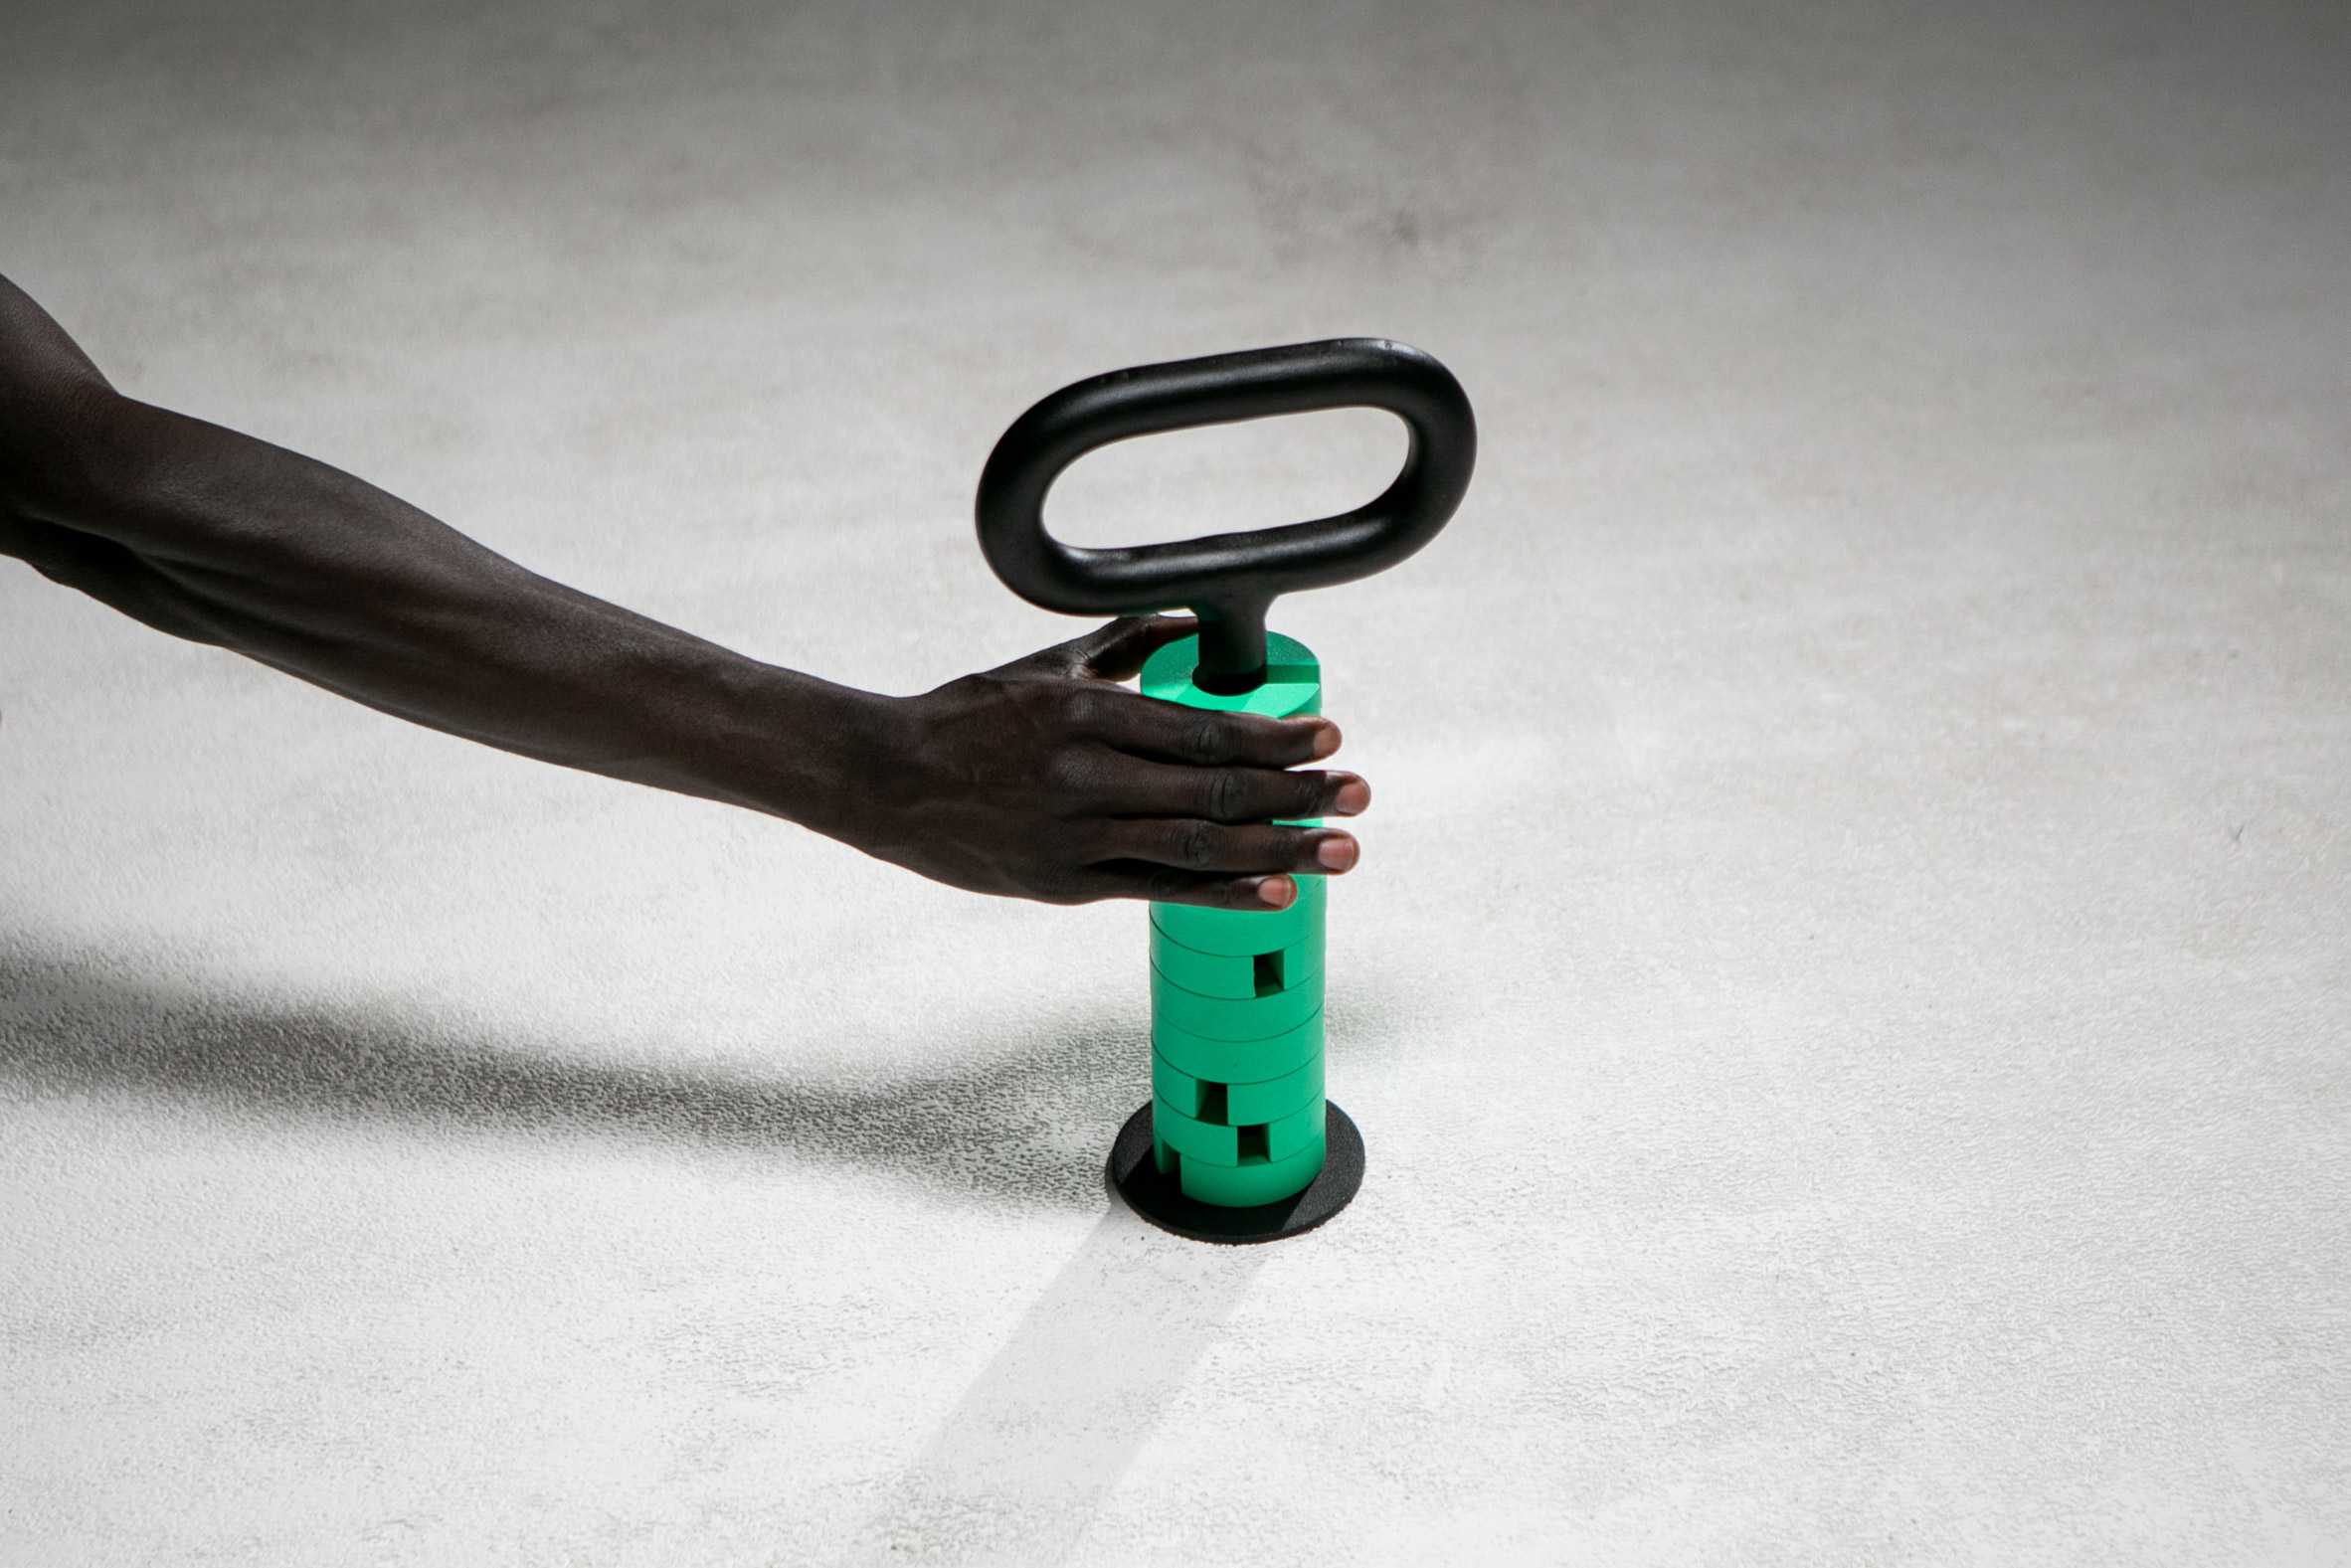 Photo of a hand grabbing Prooff's "Kettlebell" that holds extra green weights on a magazine